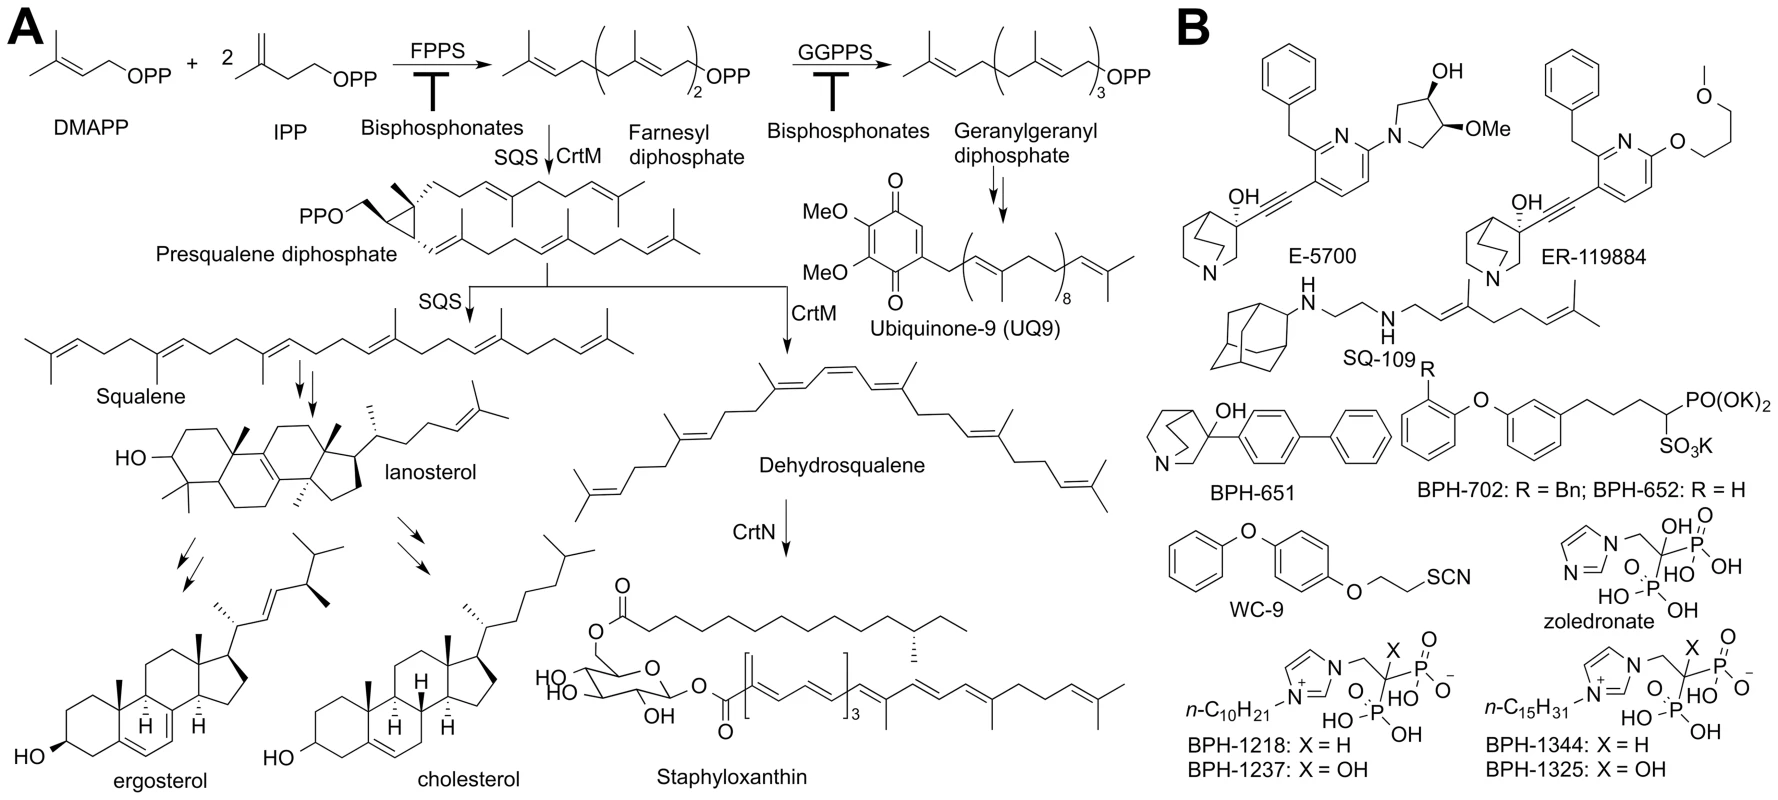 Biosynthetic pathways and structures of inhibitors.